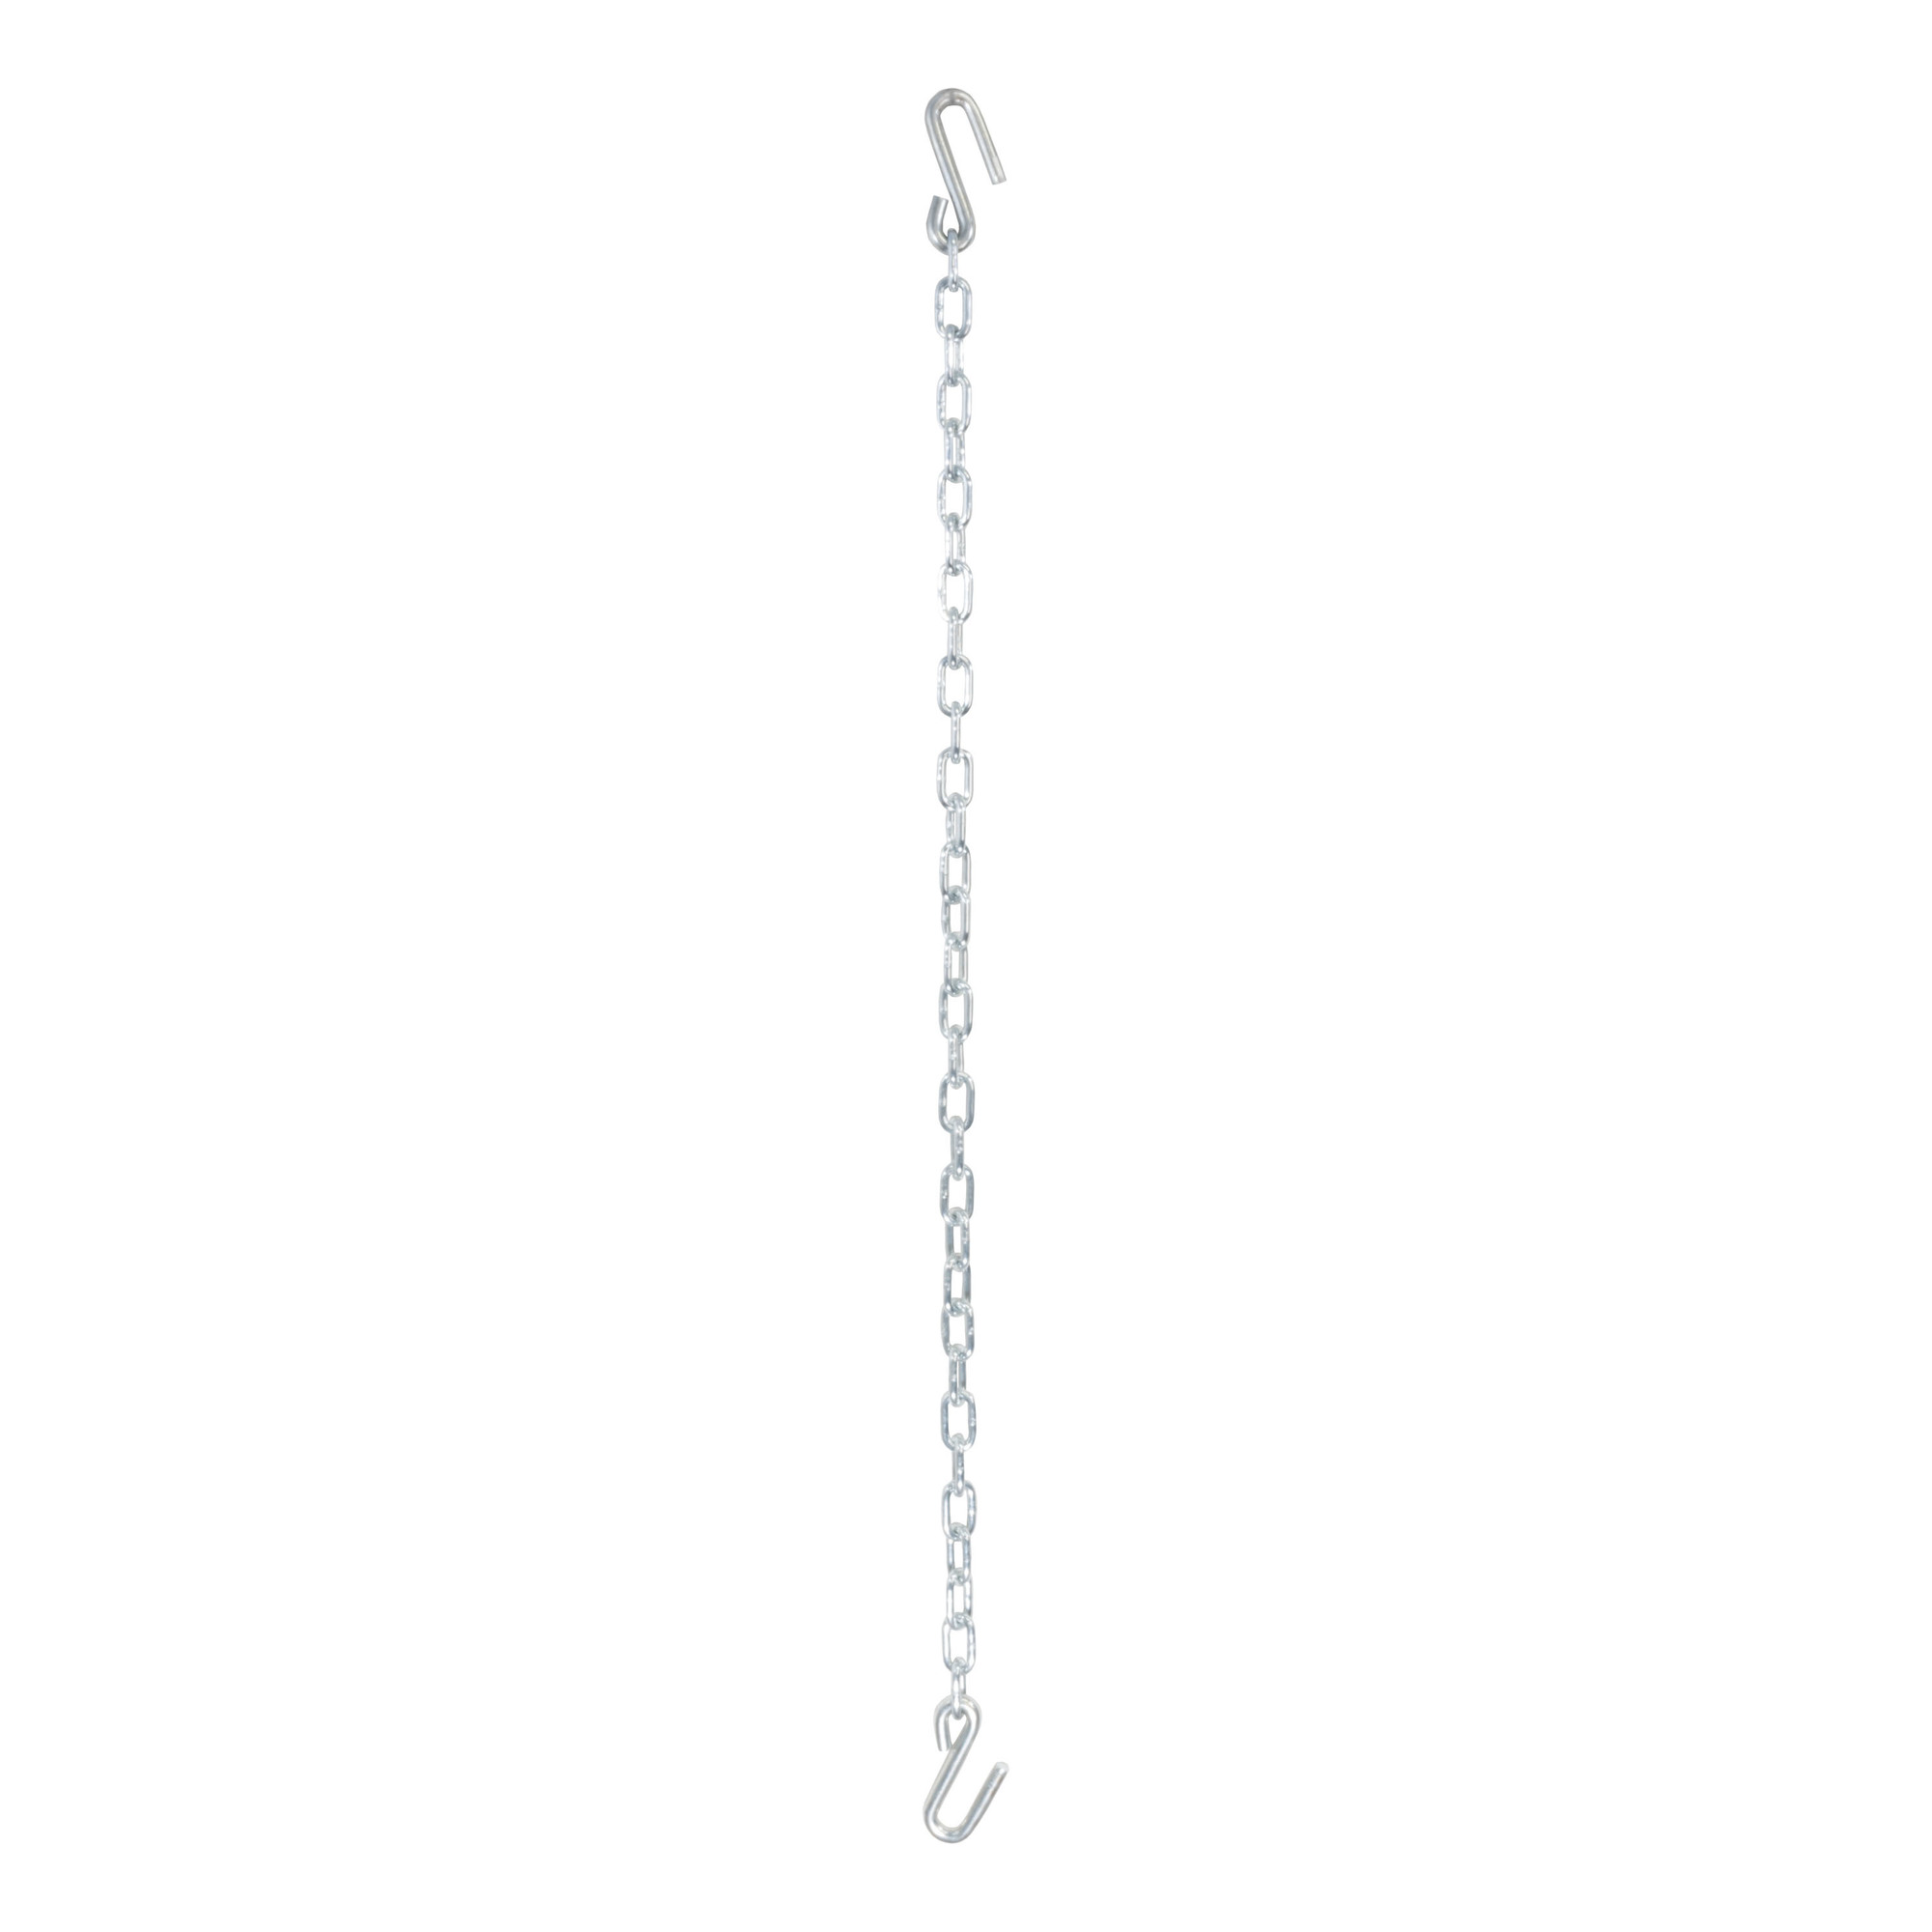 Curt Manufacturing, 48Inch Safety Chain with 2 S-Hooks, Length 48 in, Material Steel, Model 80030